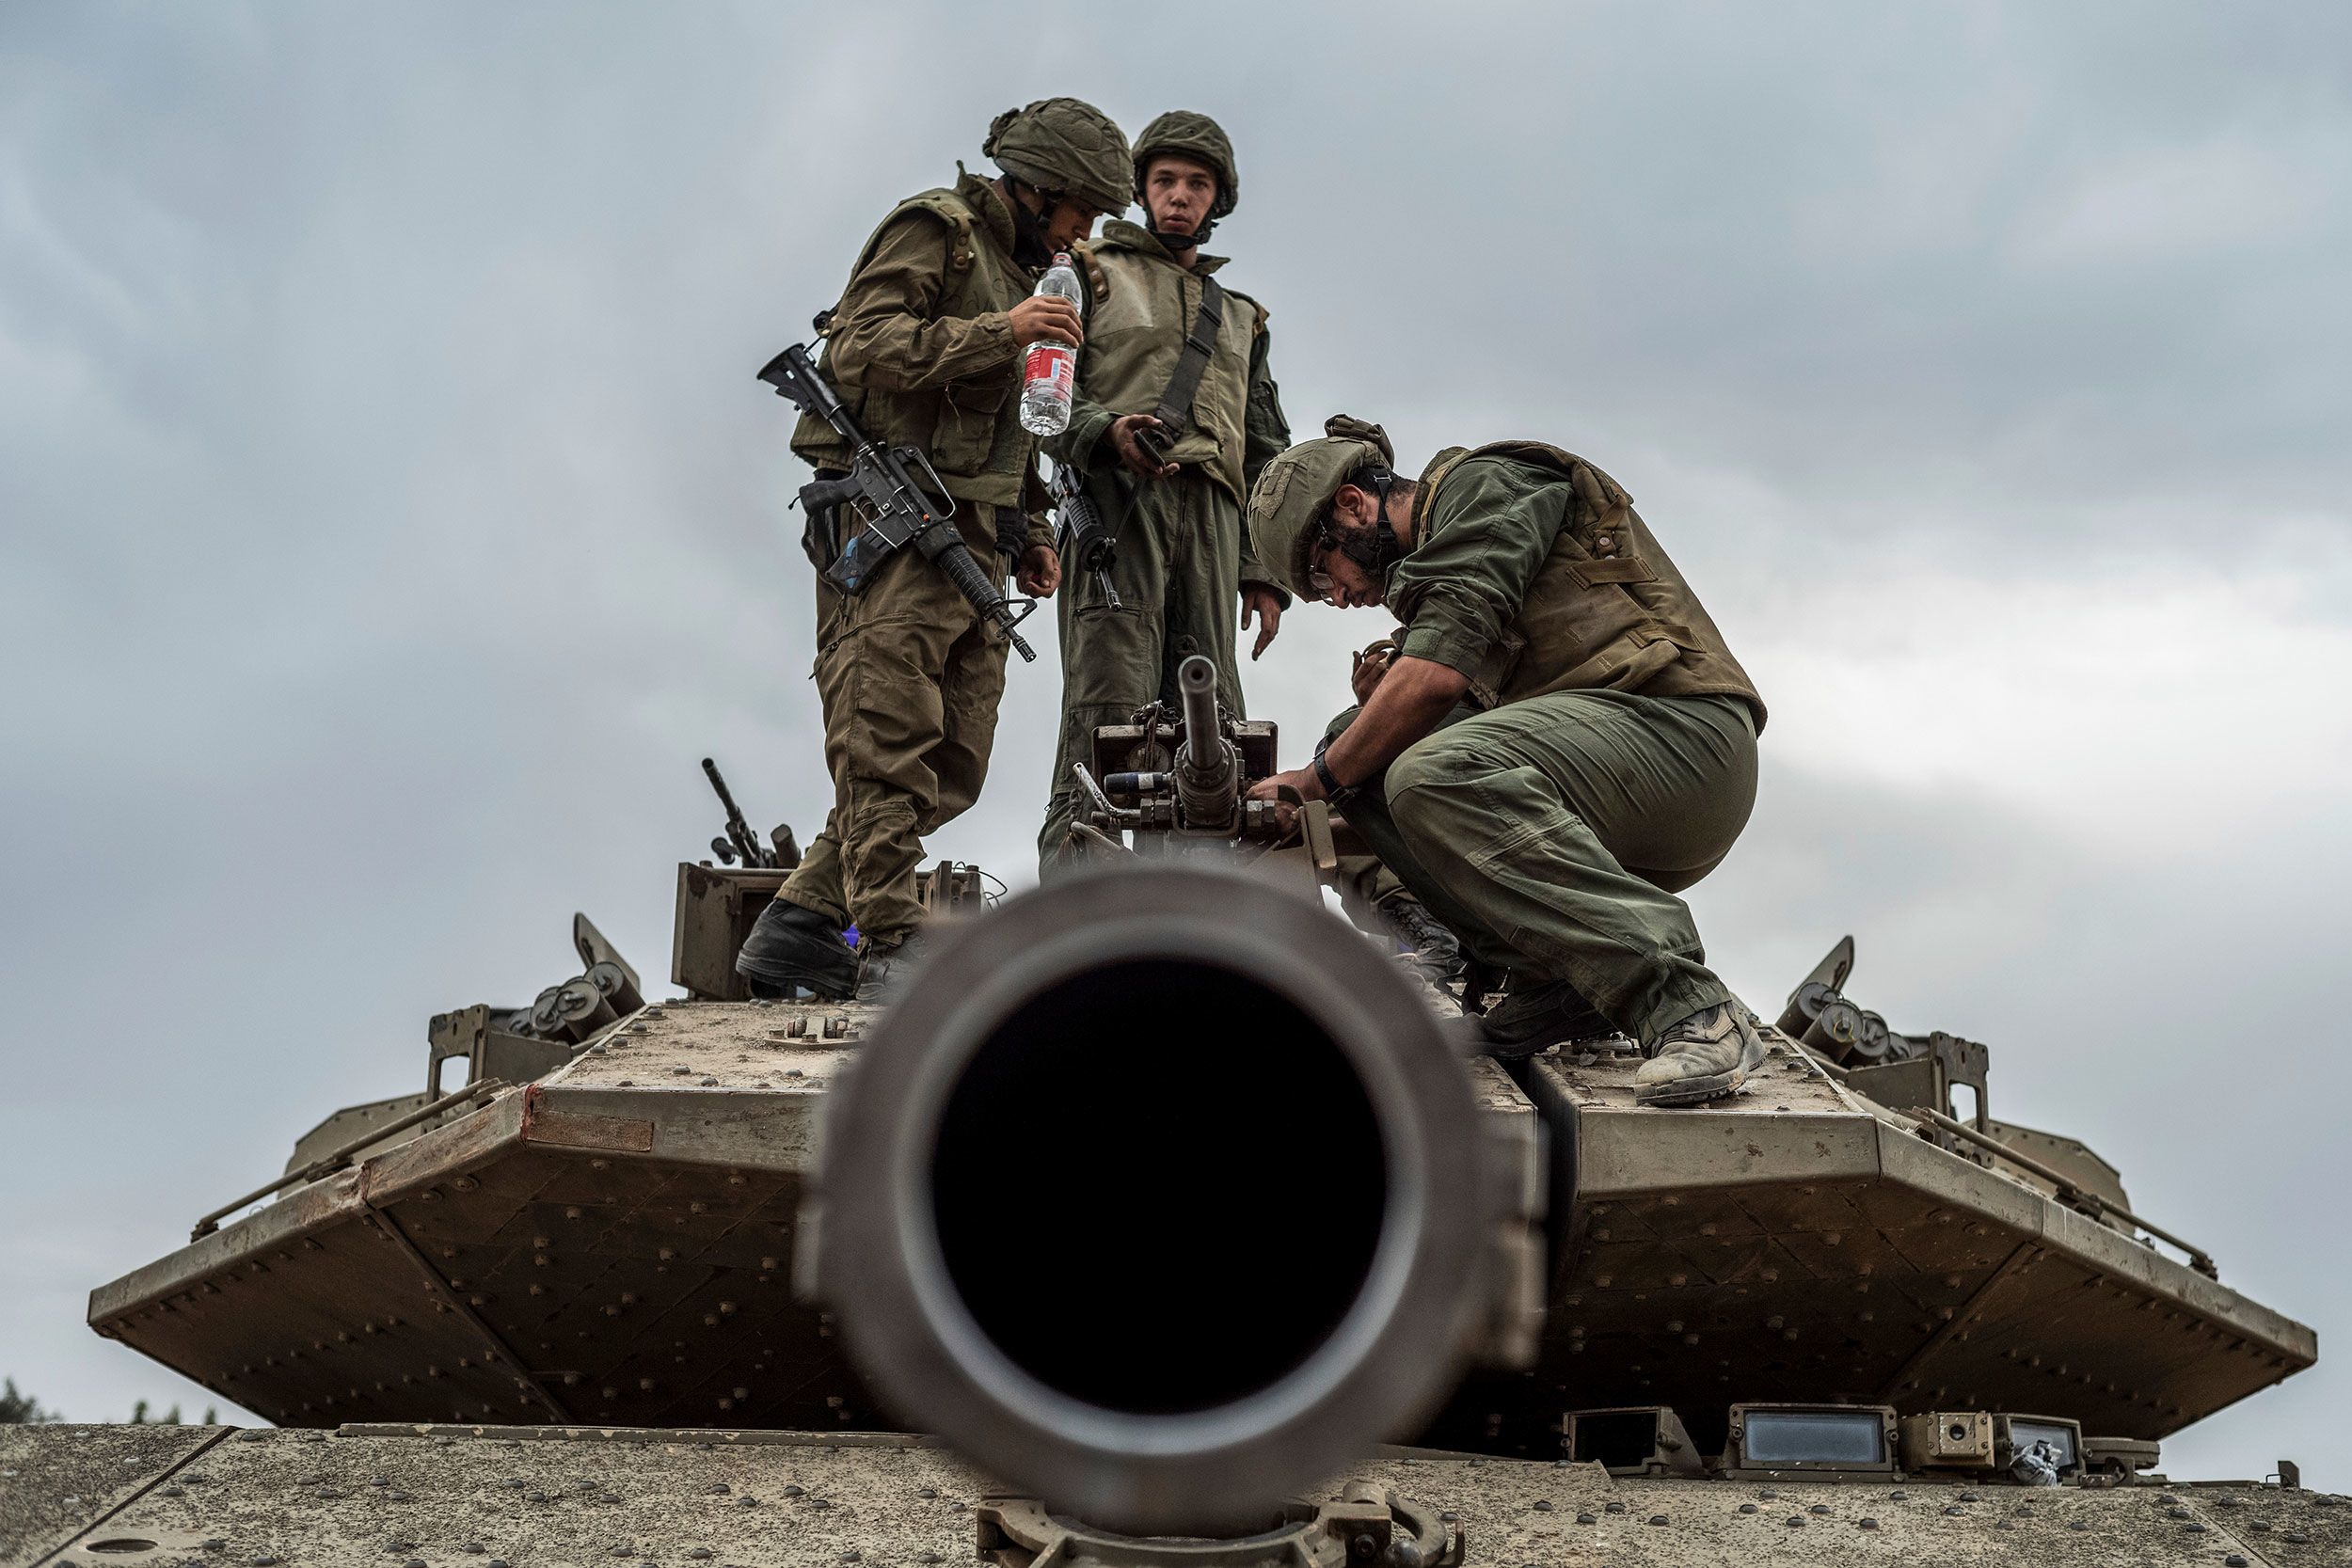 Israeli soldiers work on a tank at the border between Israel and Gaza on October 9.